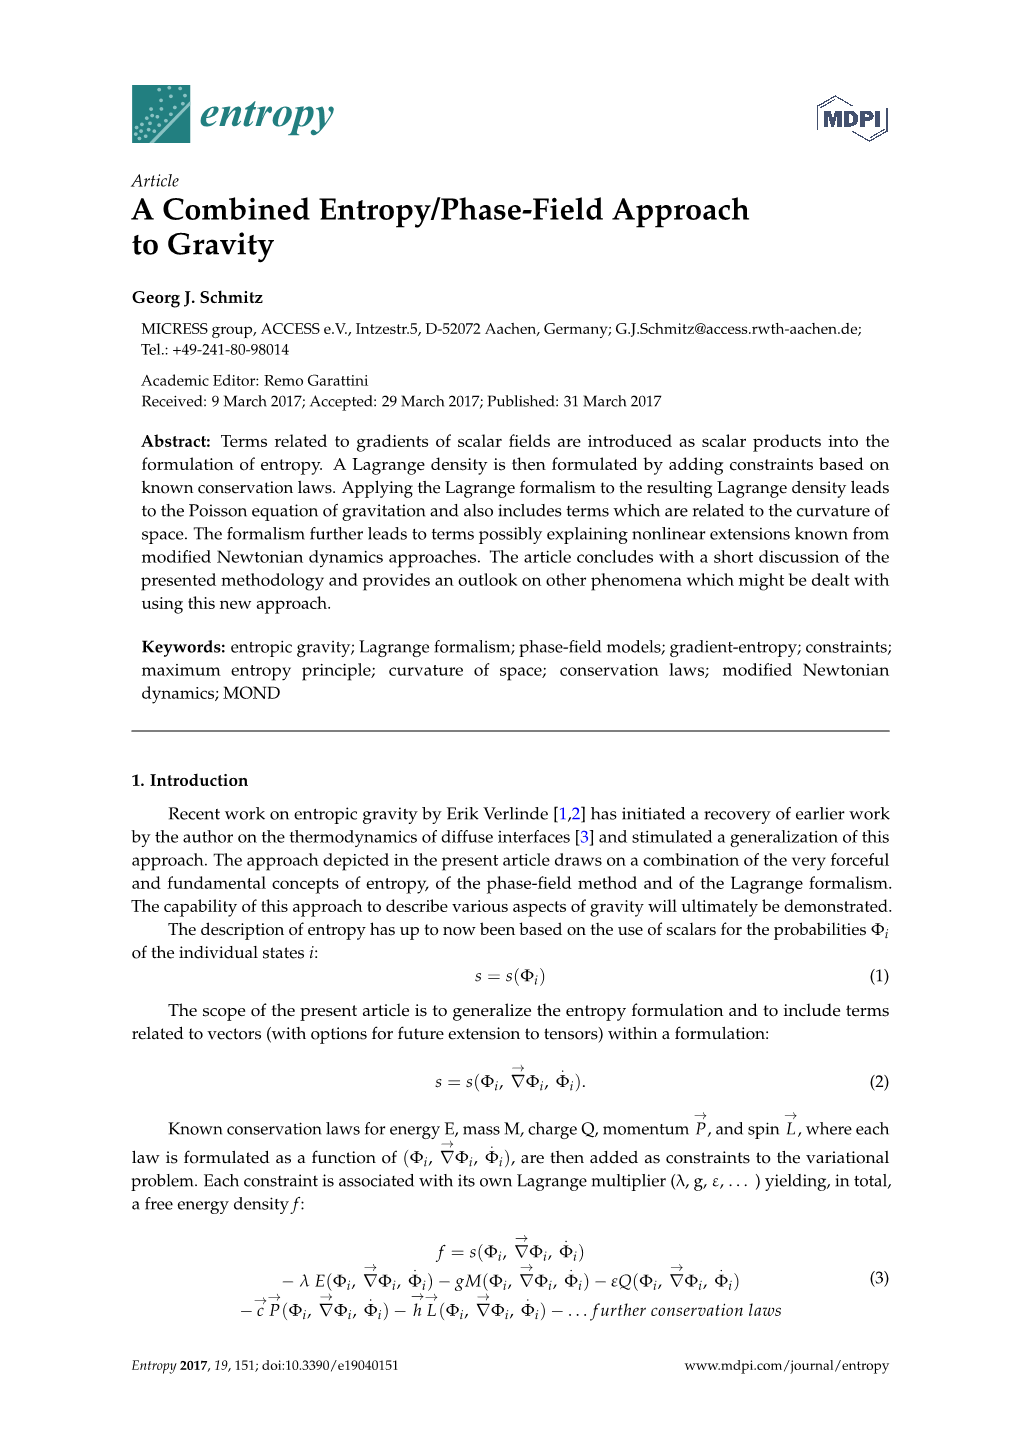 A Combined Entropy/Phase-Field Approach to Gravity